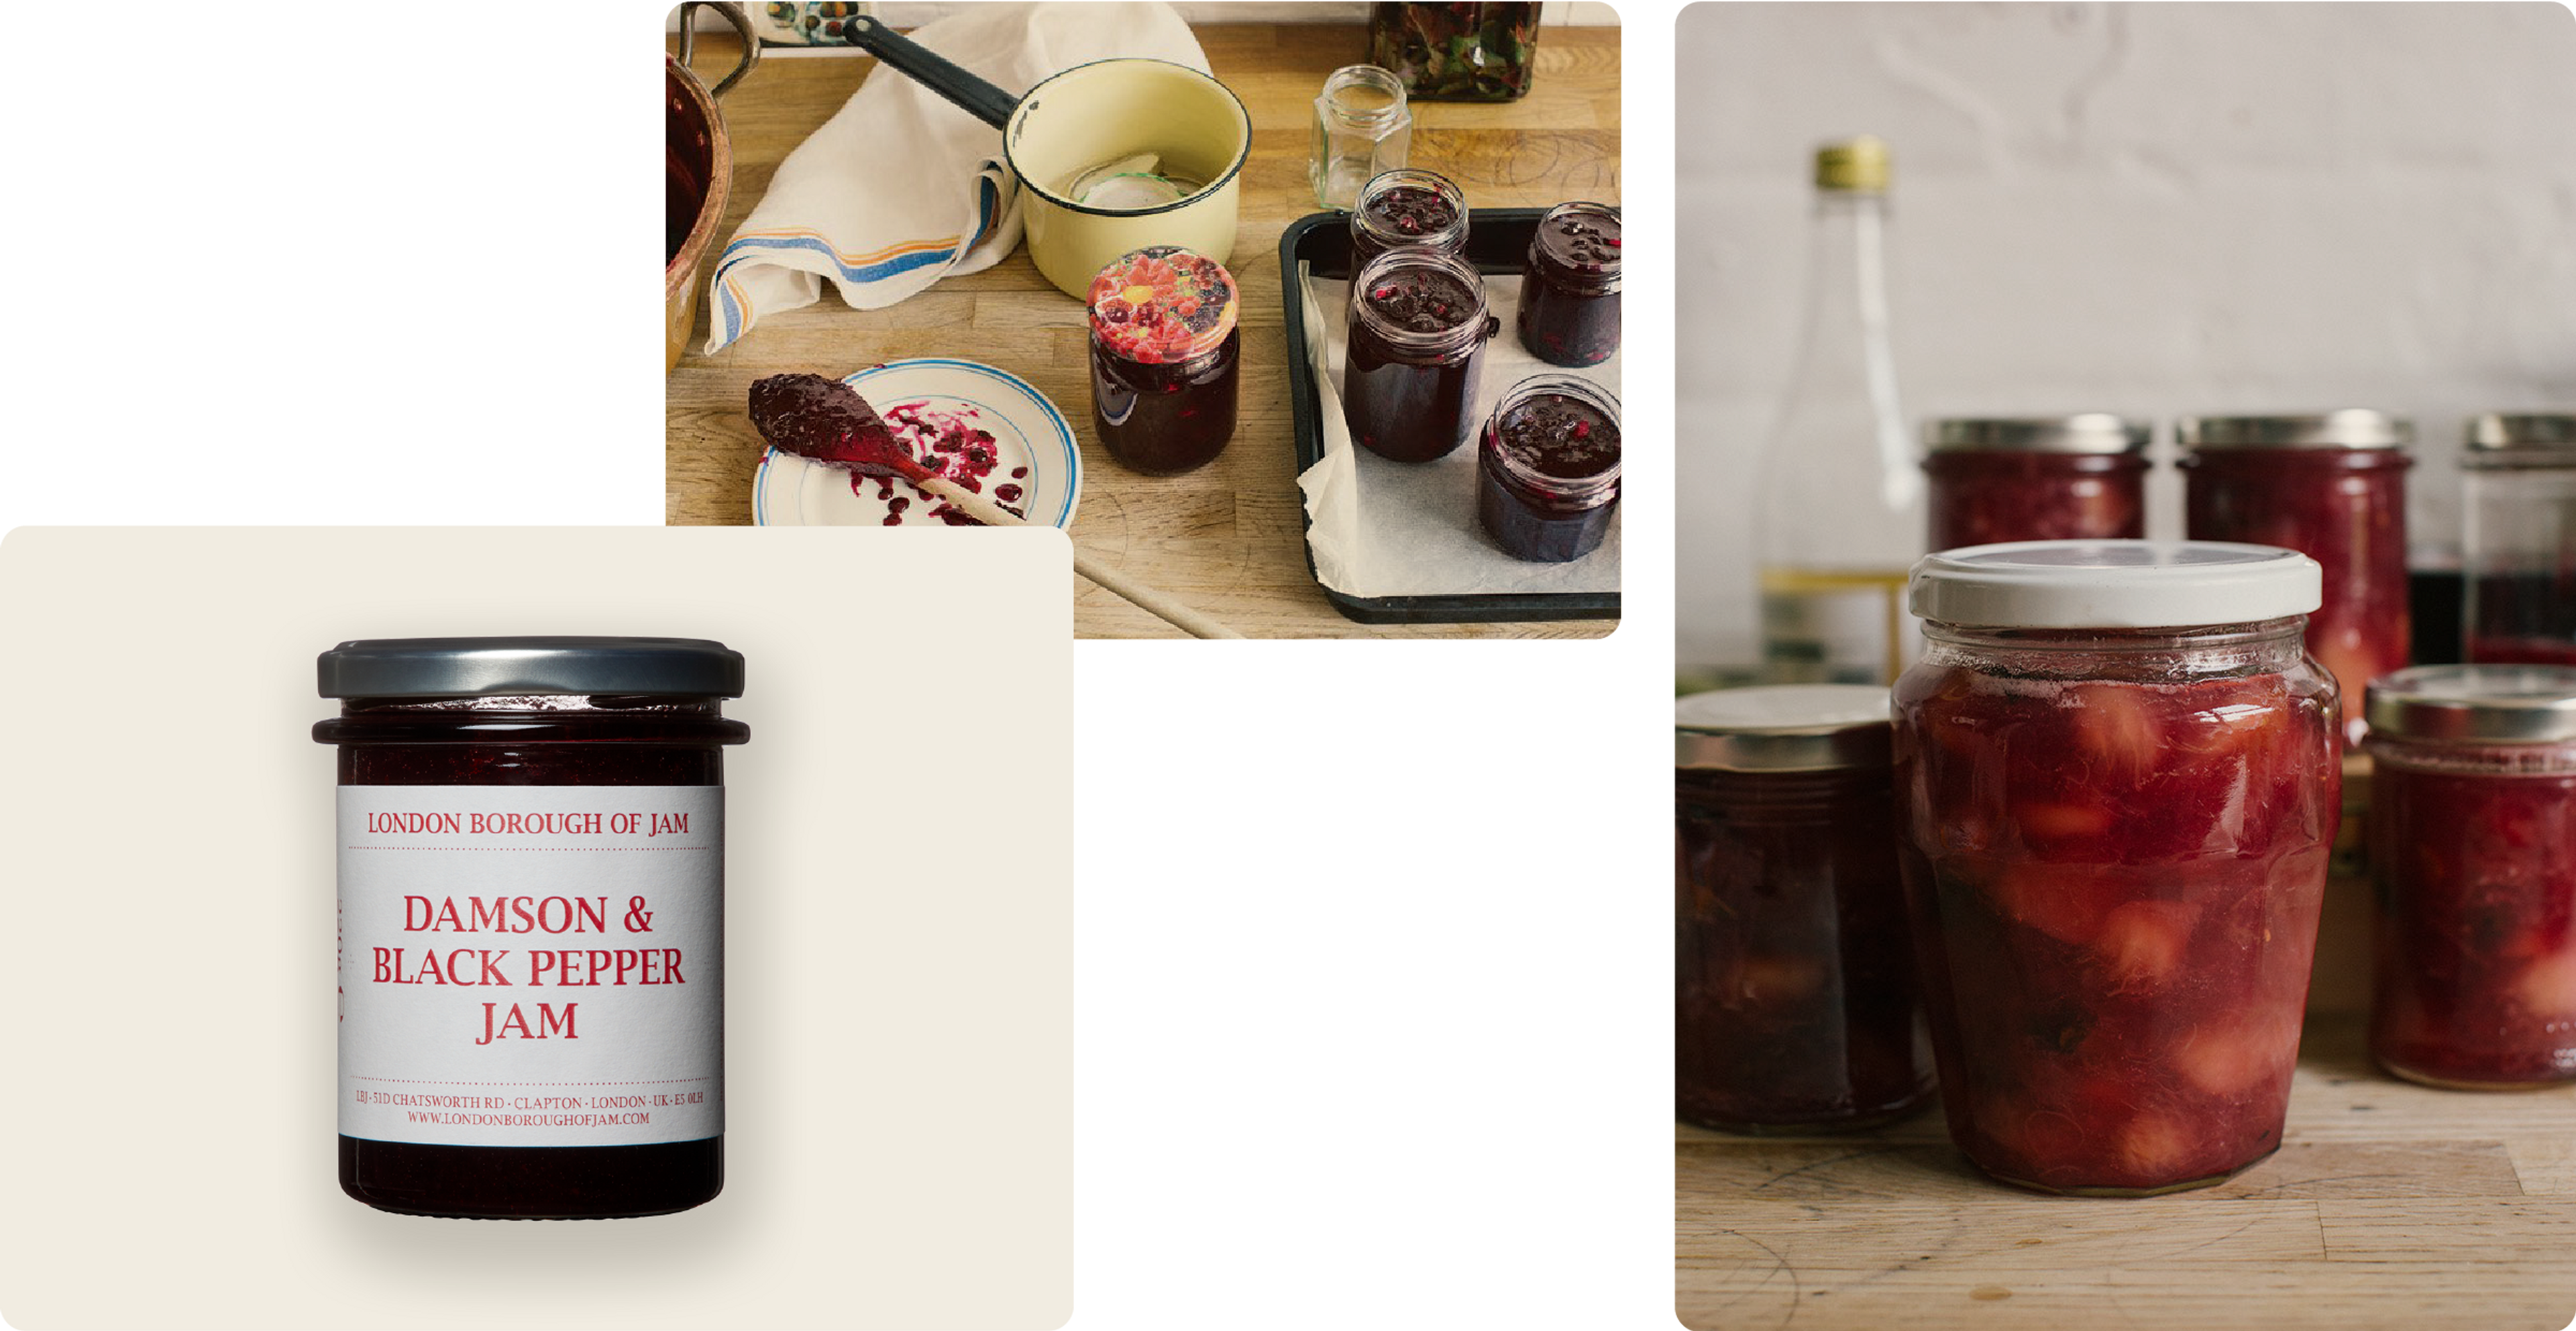 Gift imagery from London Borough of Jam